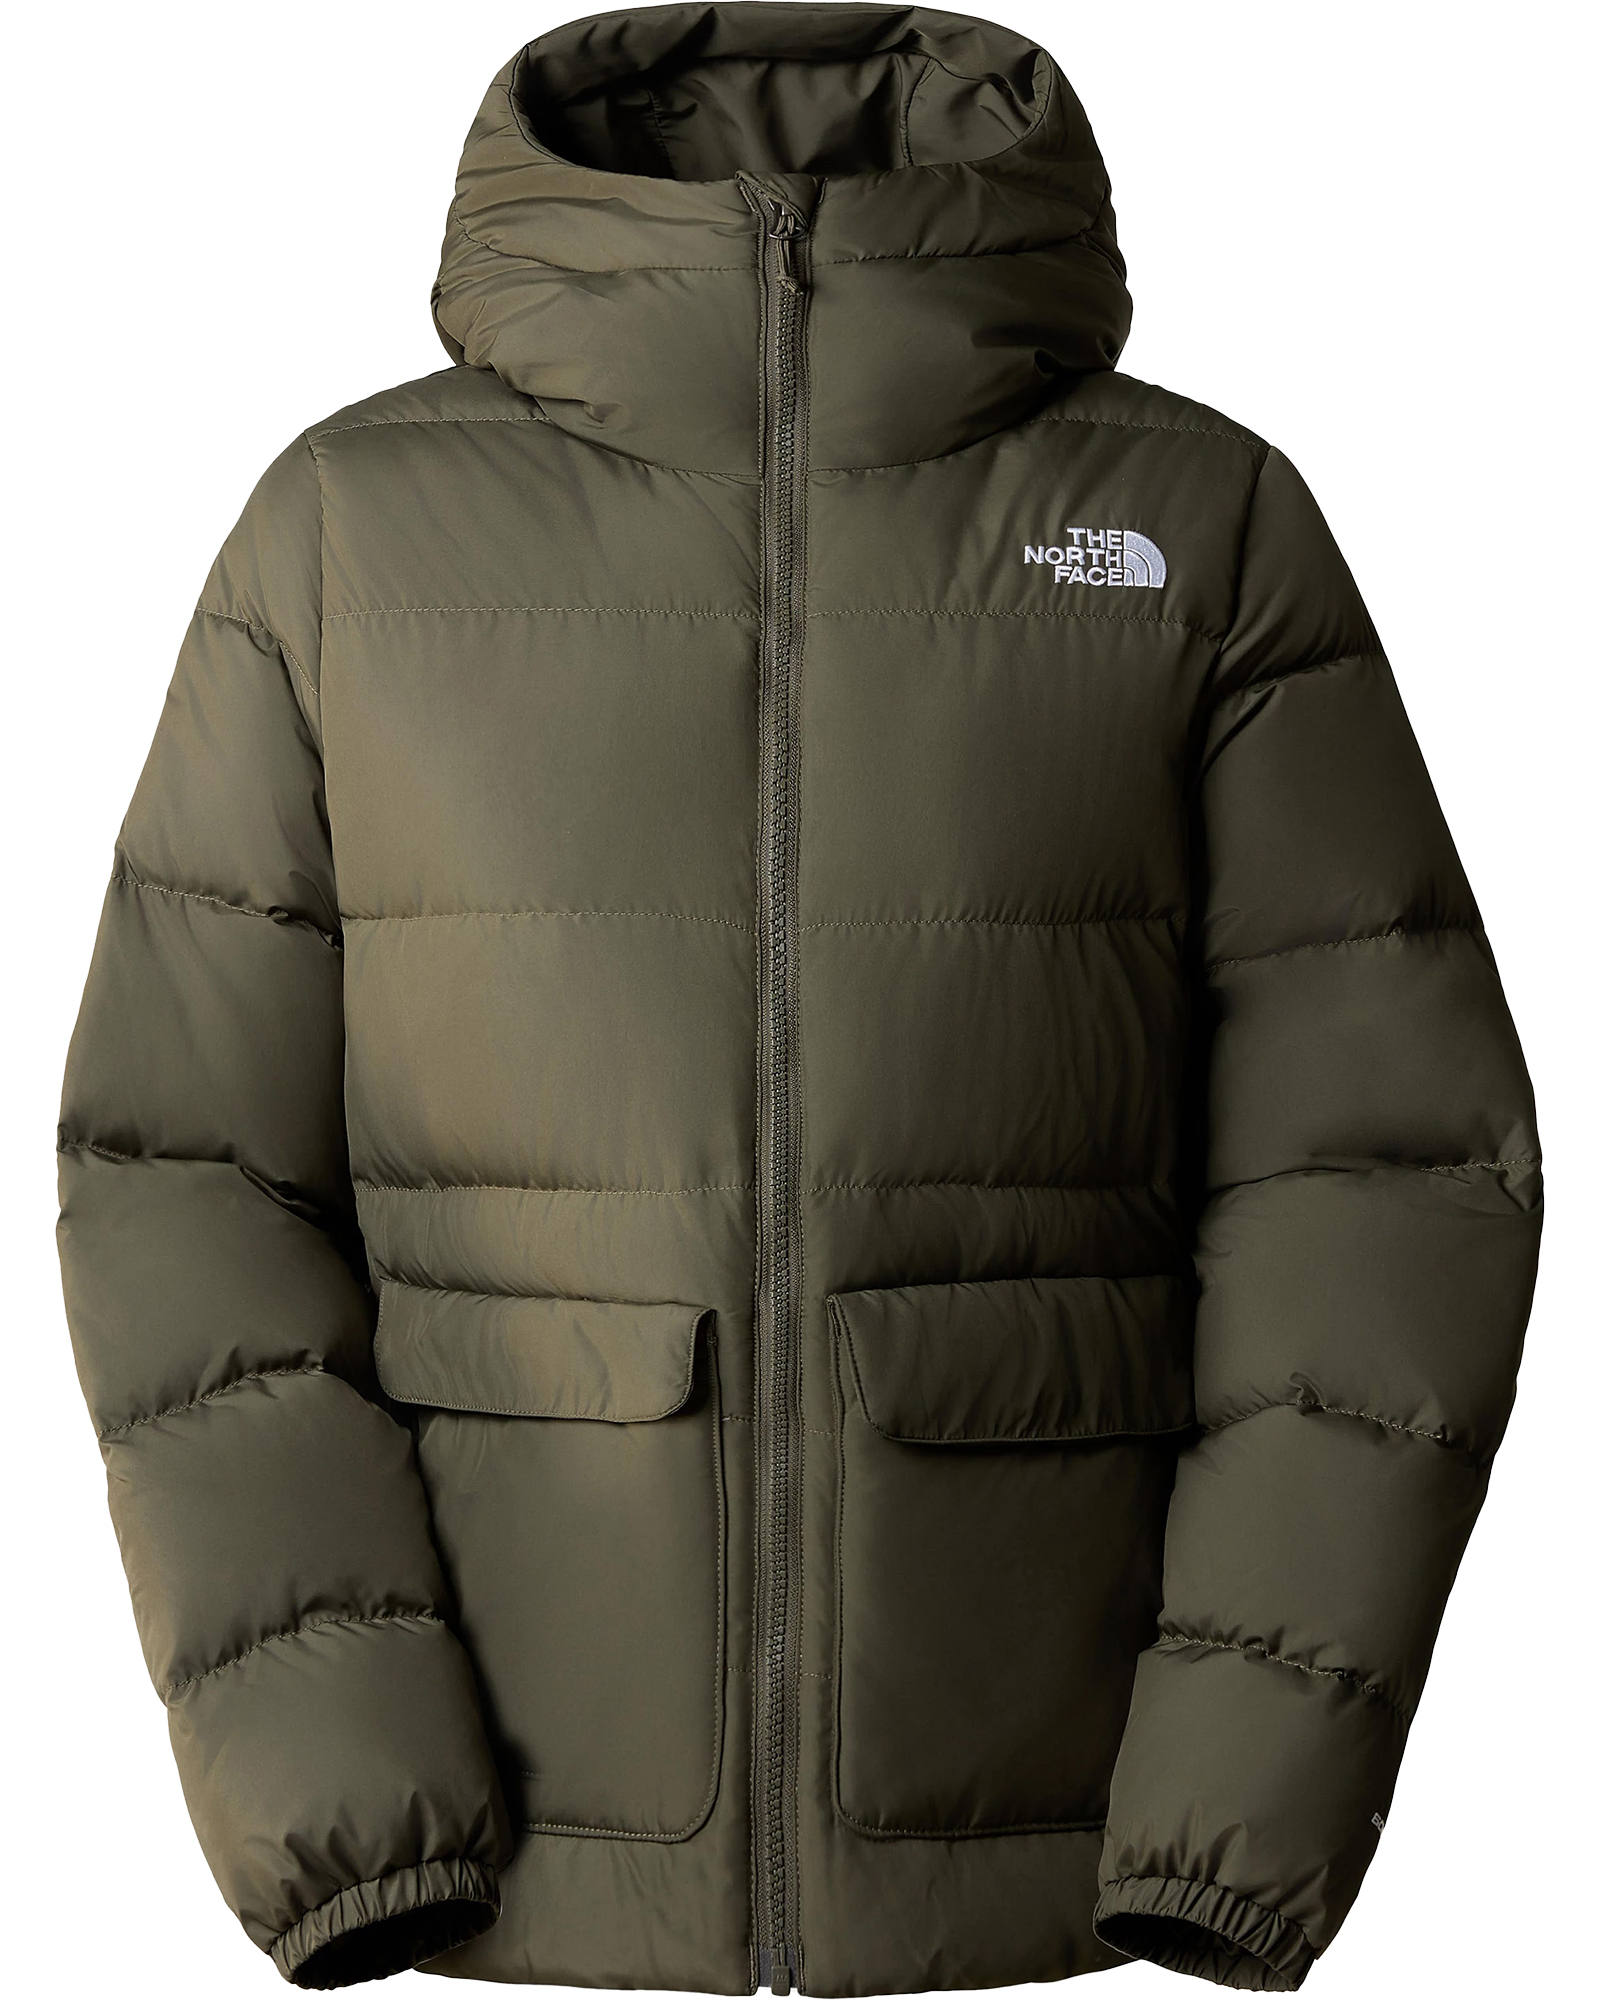 The North Face Women’s Gotham Down Jacket - New Taupe Green M